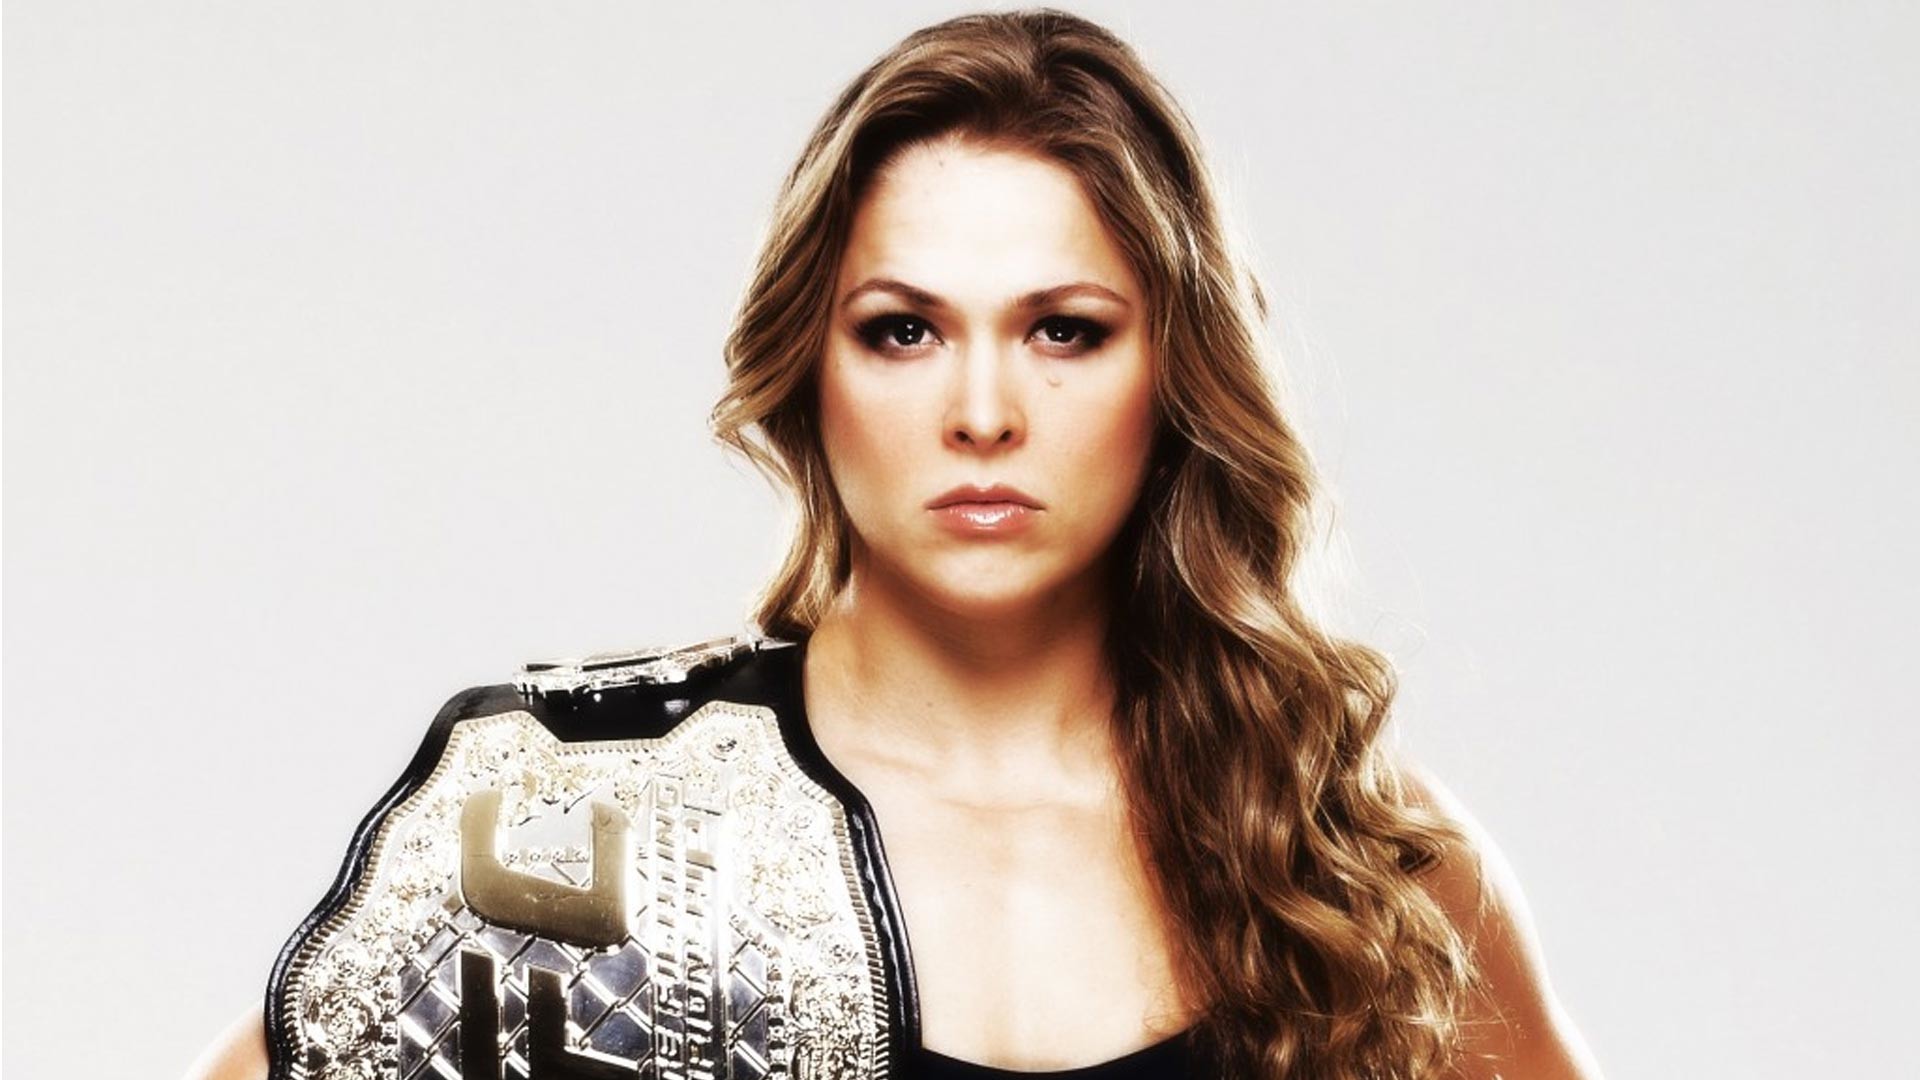 1920x1080 Ronda Rousey UFC High Quality 4K Wallpapers -  http://wallucky.com/ronda-rousey-ufc-high-quality-4k-wallpapers/ |  Wallpapers and Backgrounds HD | Pinterest ...